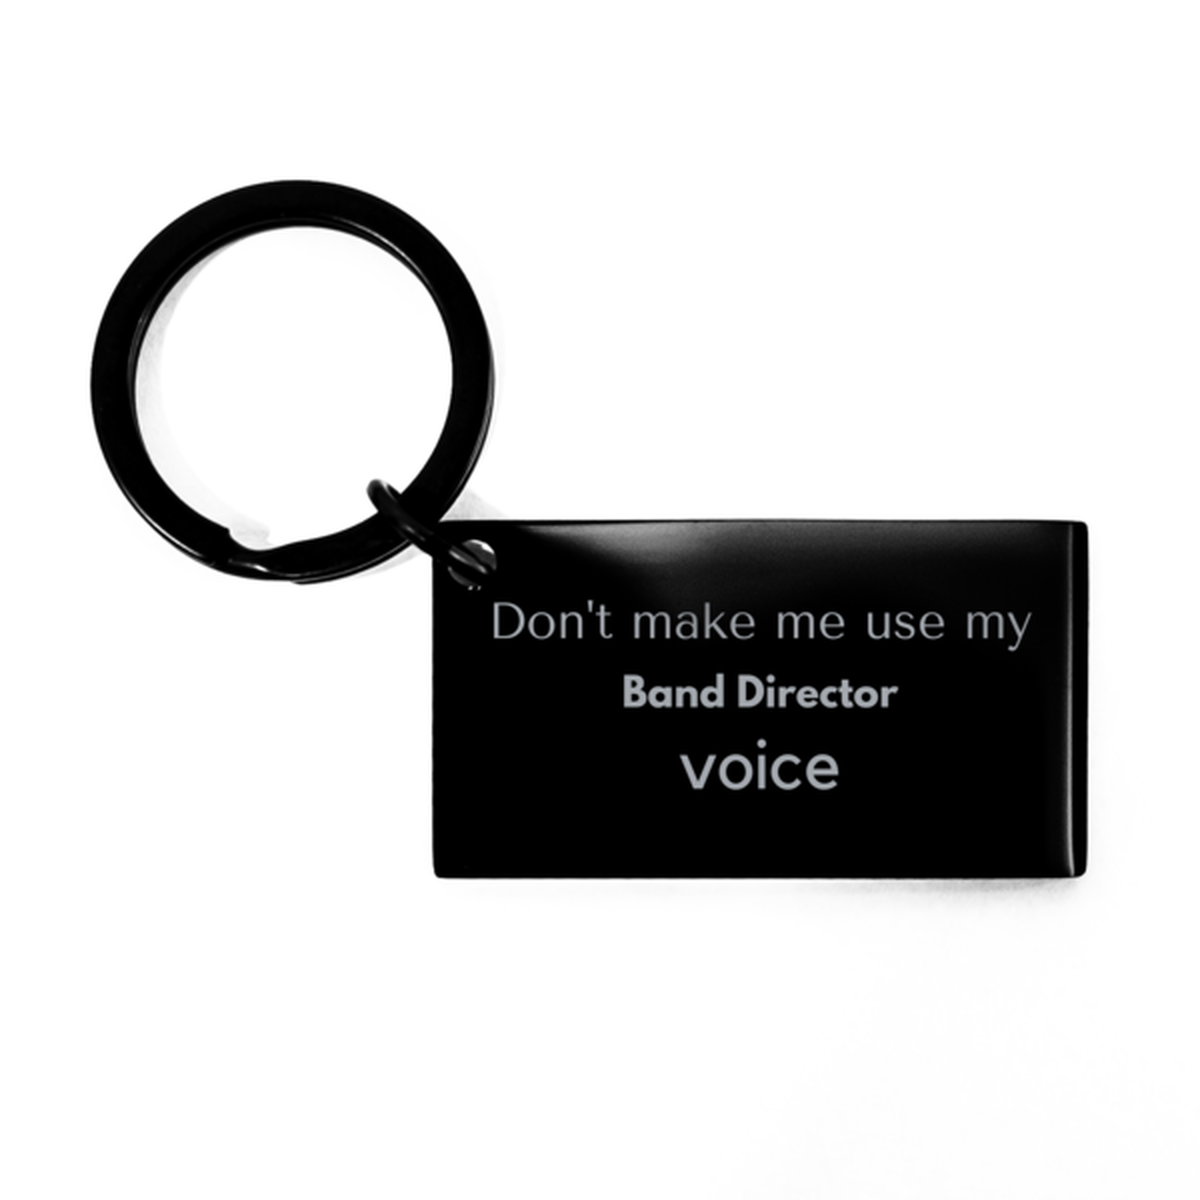 Don't make me use my Band Director voice, Sarcasm Band Director Gifts, Christmas Band Director Keychain Birthday Unique Gifts For Band Director Coworkers, Men, Women, Colleague, Friends